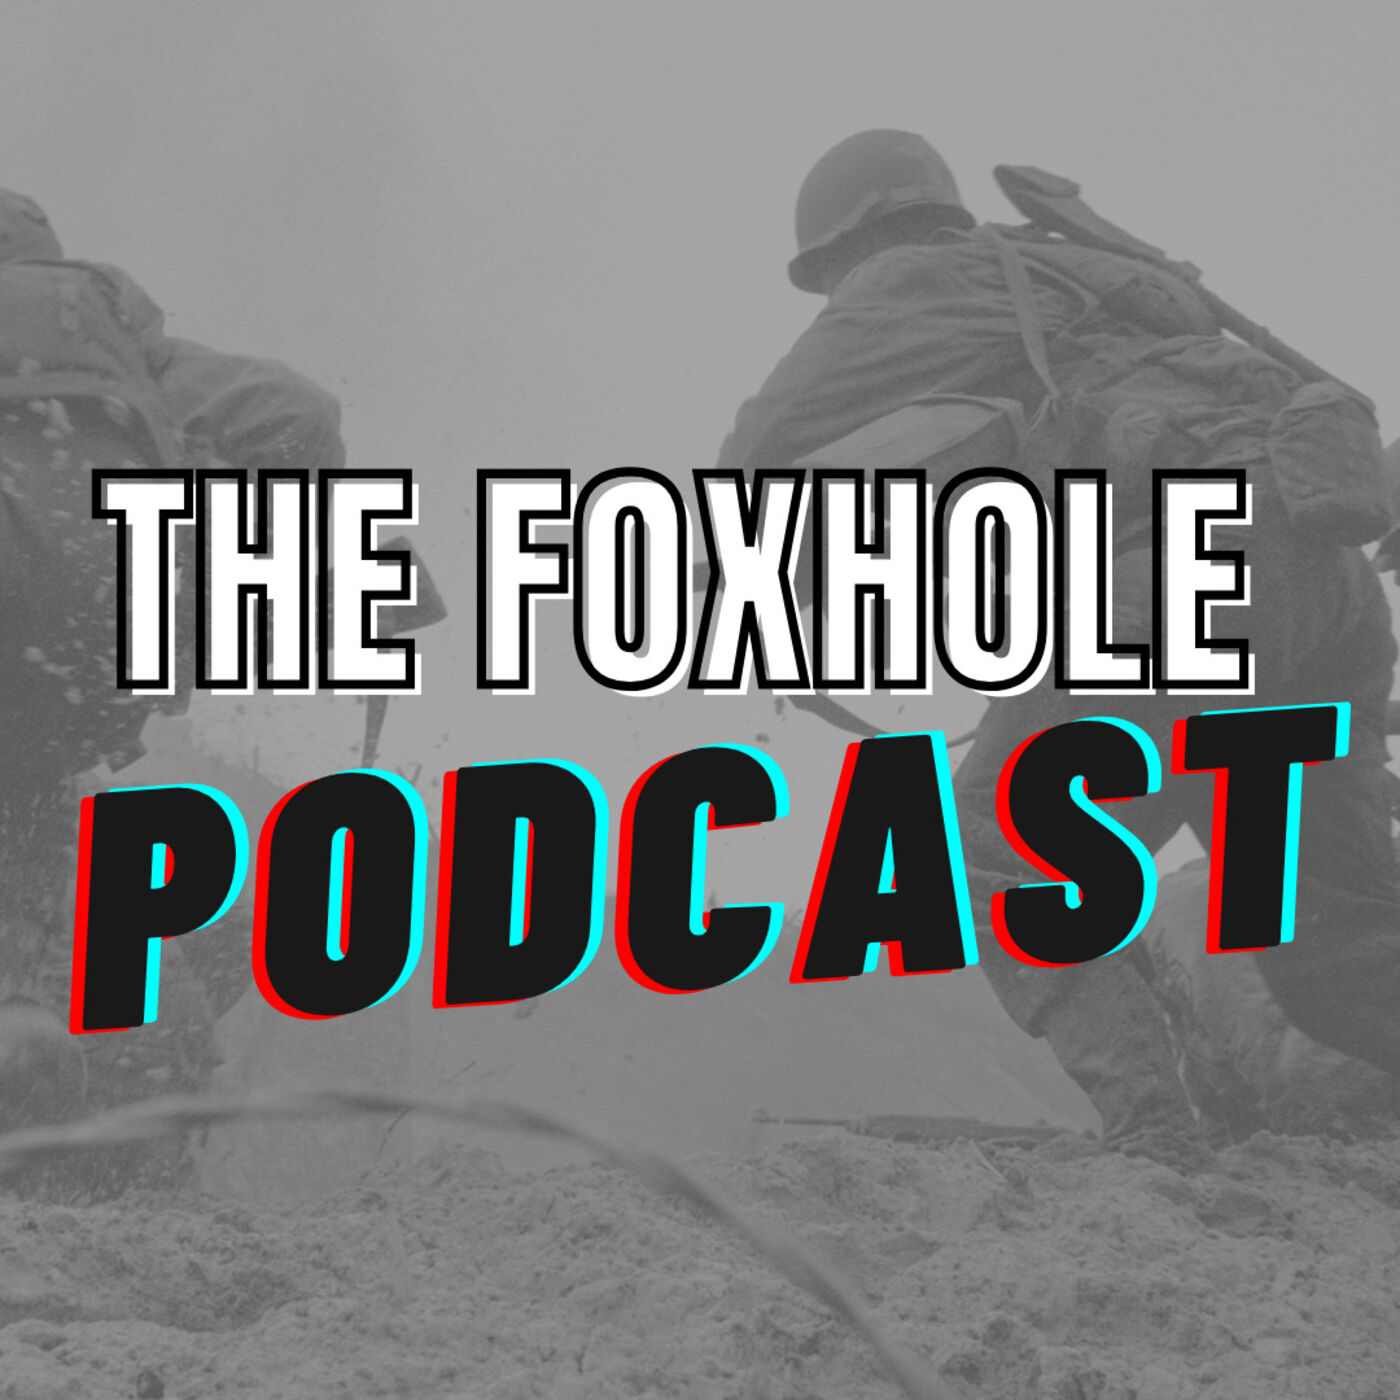 A highlight from The Foxhole Podcast 1 Year Anniversary